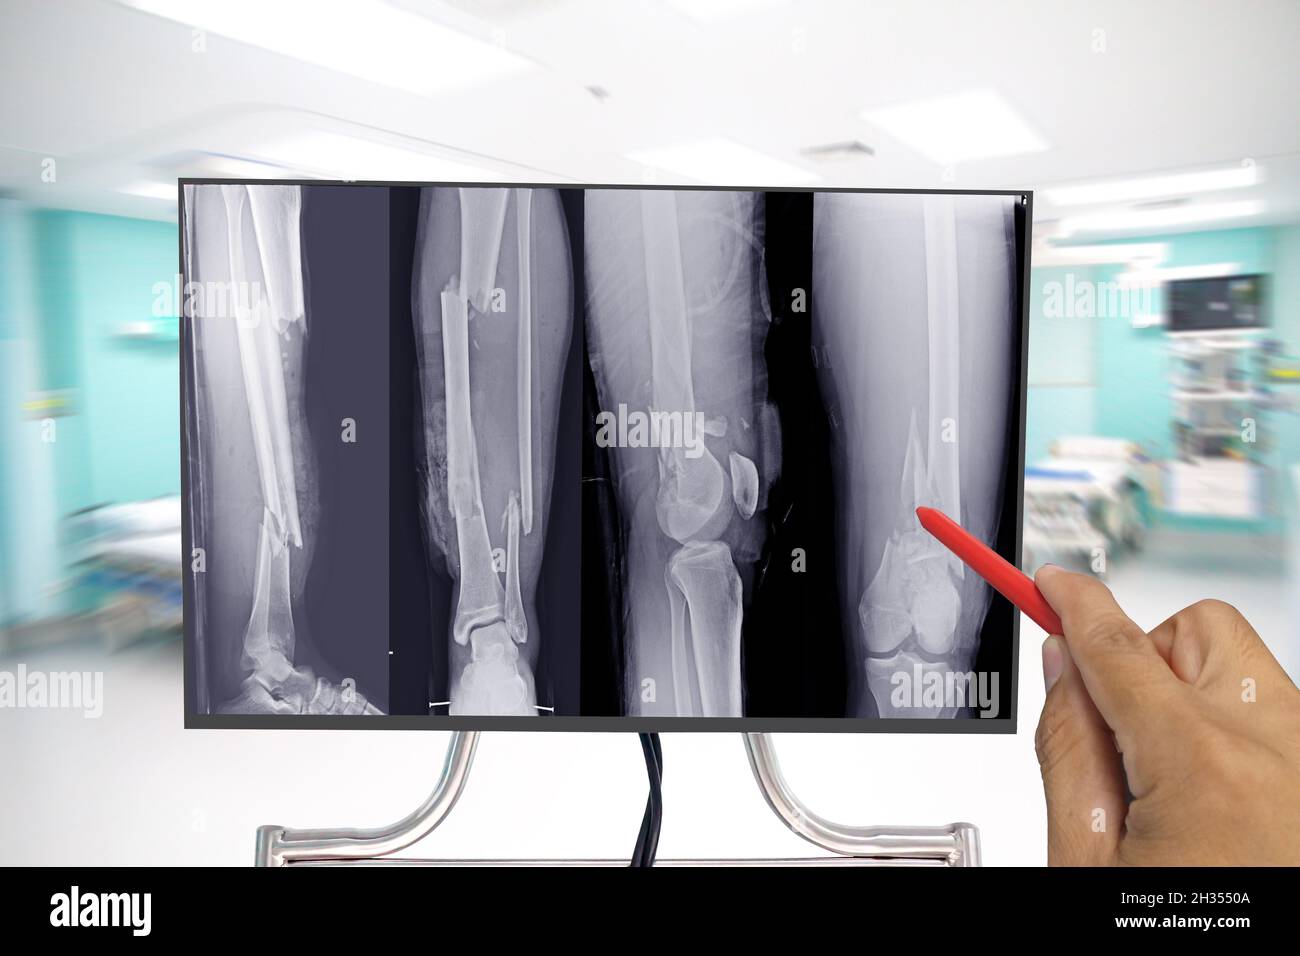 Close up X-ray whole leg bone showing fracture multiple fractures bone, Doctor holding a red pen point , symptoms medical healthcare concept. Stock Photo